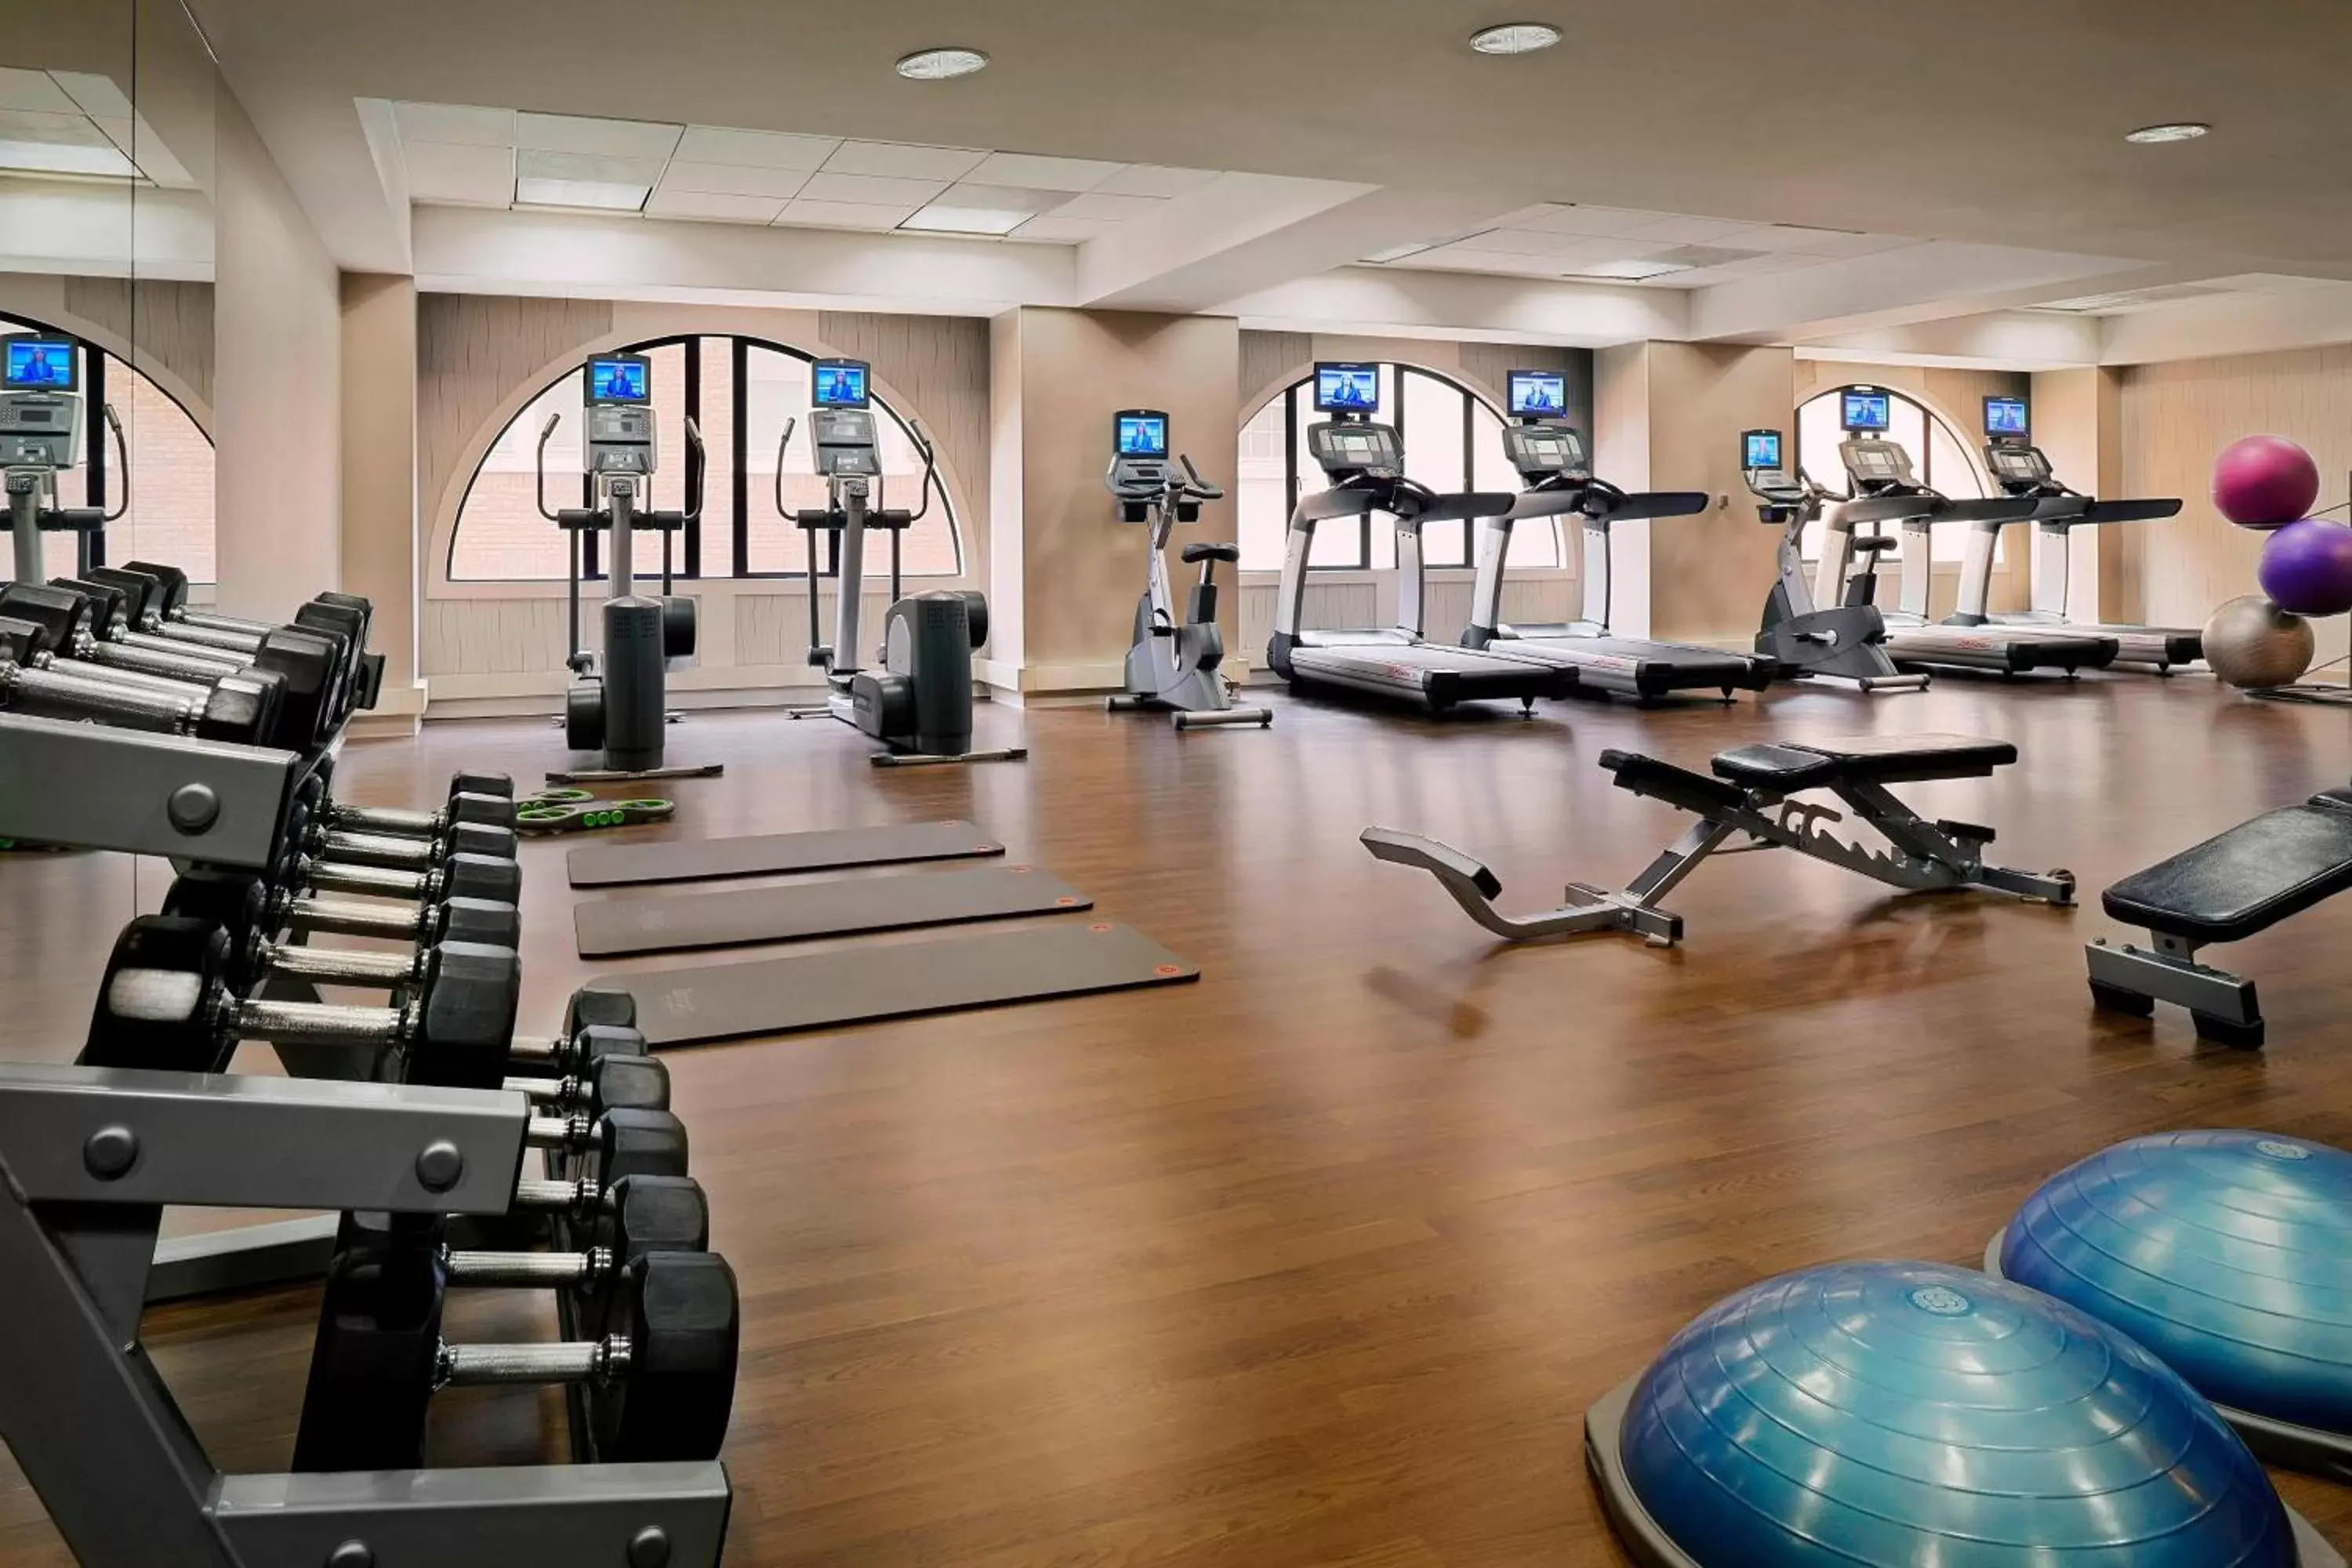 Fitness centre/facilities, Fitness Center/Facilities in JW Marriott San Francisco Union Square